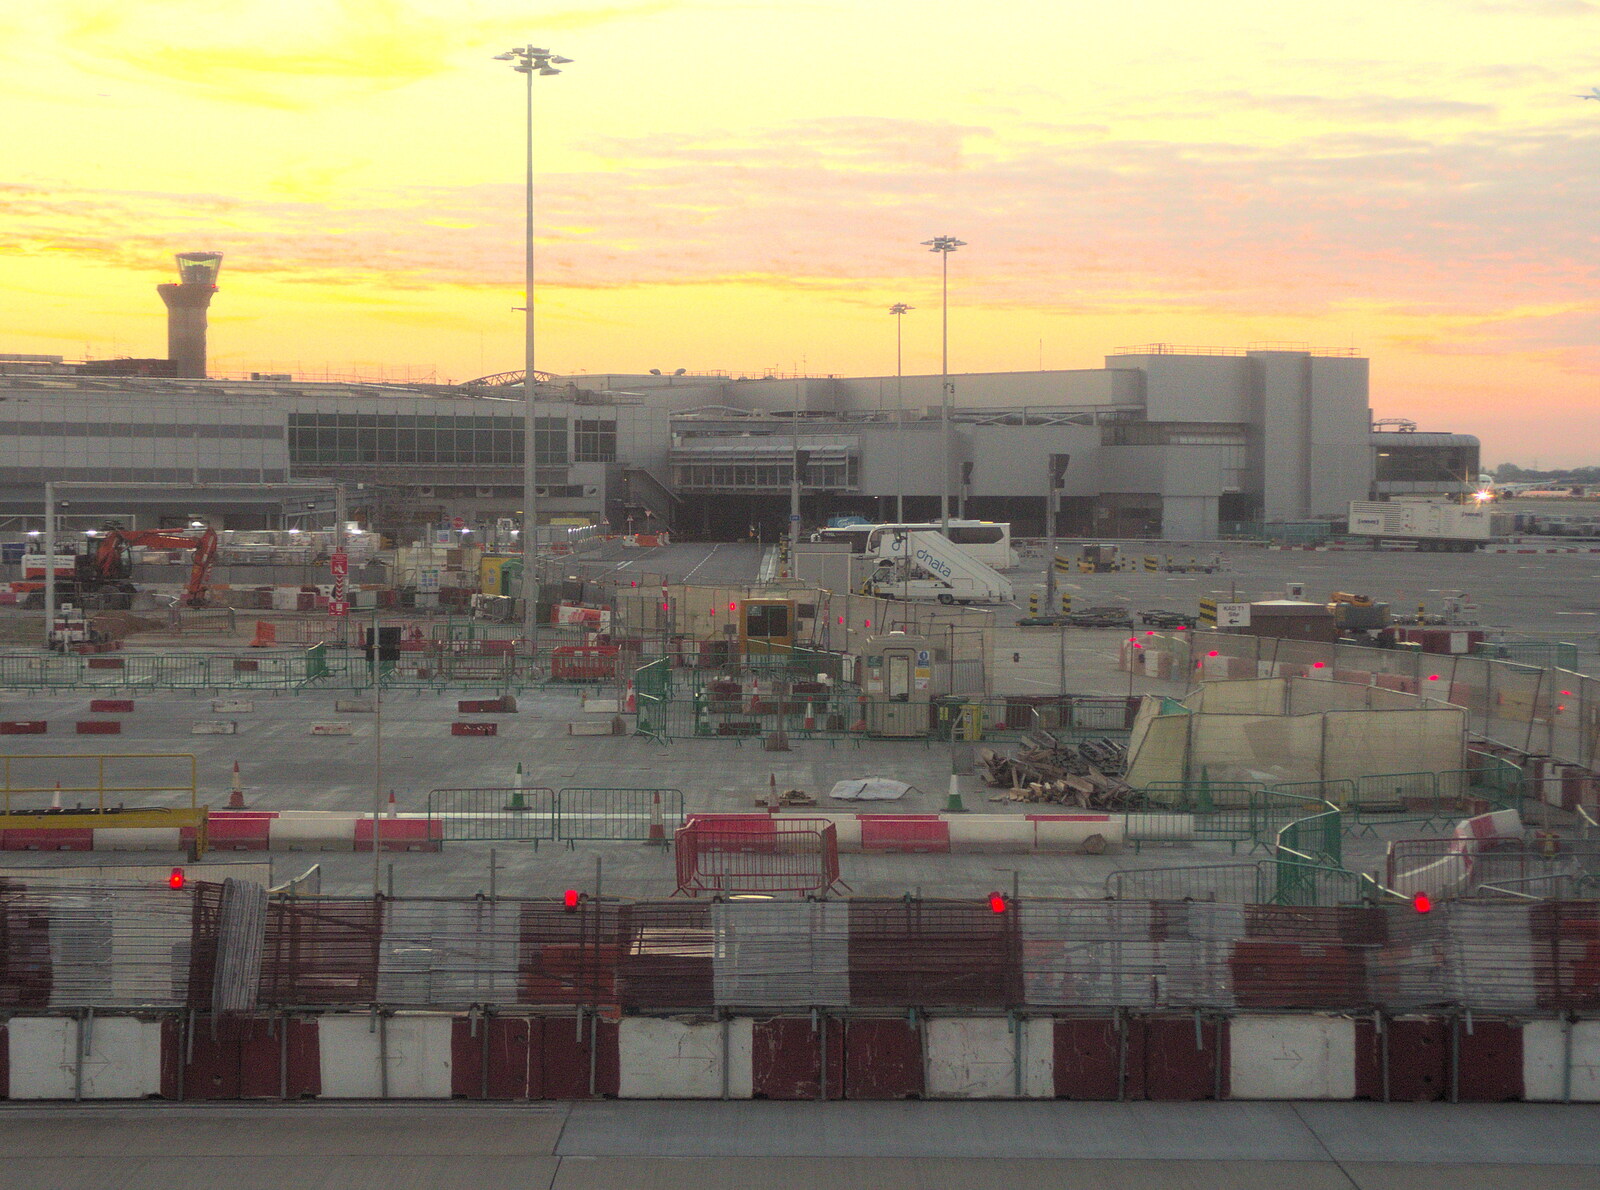 The chaos of Terminal 2's apron from A Trip to Short Hills, New Jersey, United States - 20th October 2018